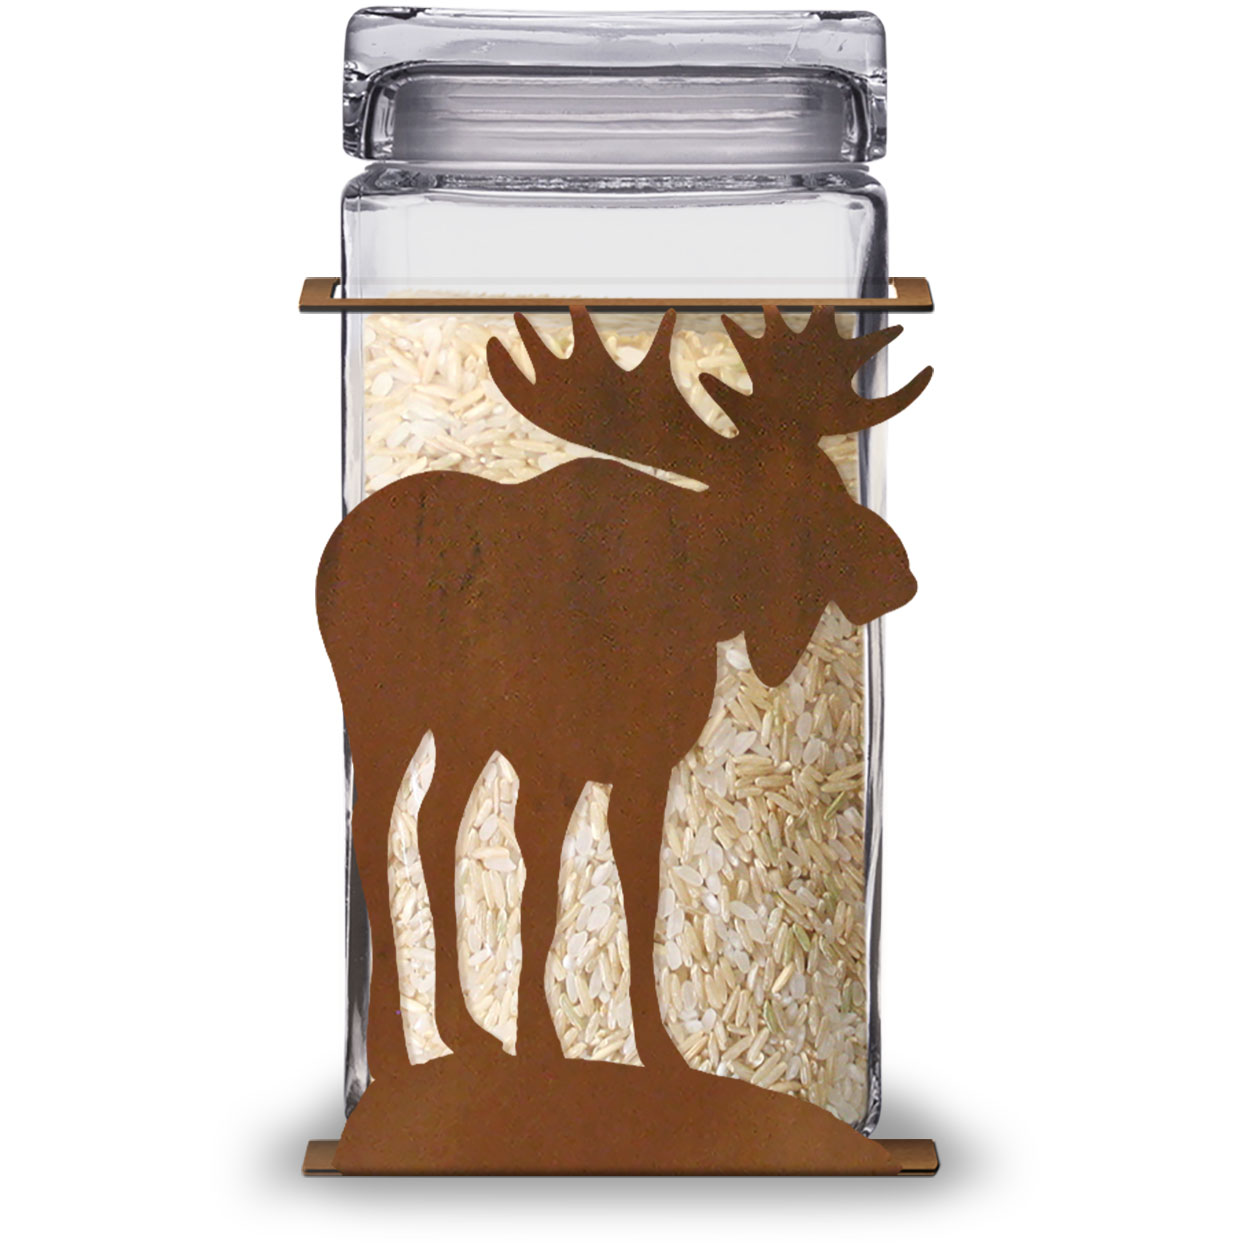 620033R - Moose 2-Quart Glass and Metal Canister in Rust Patina